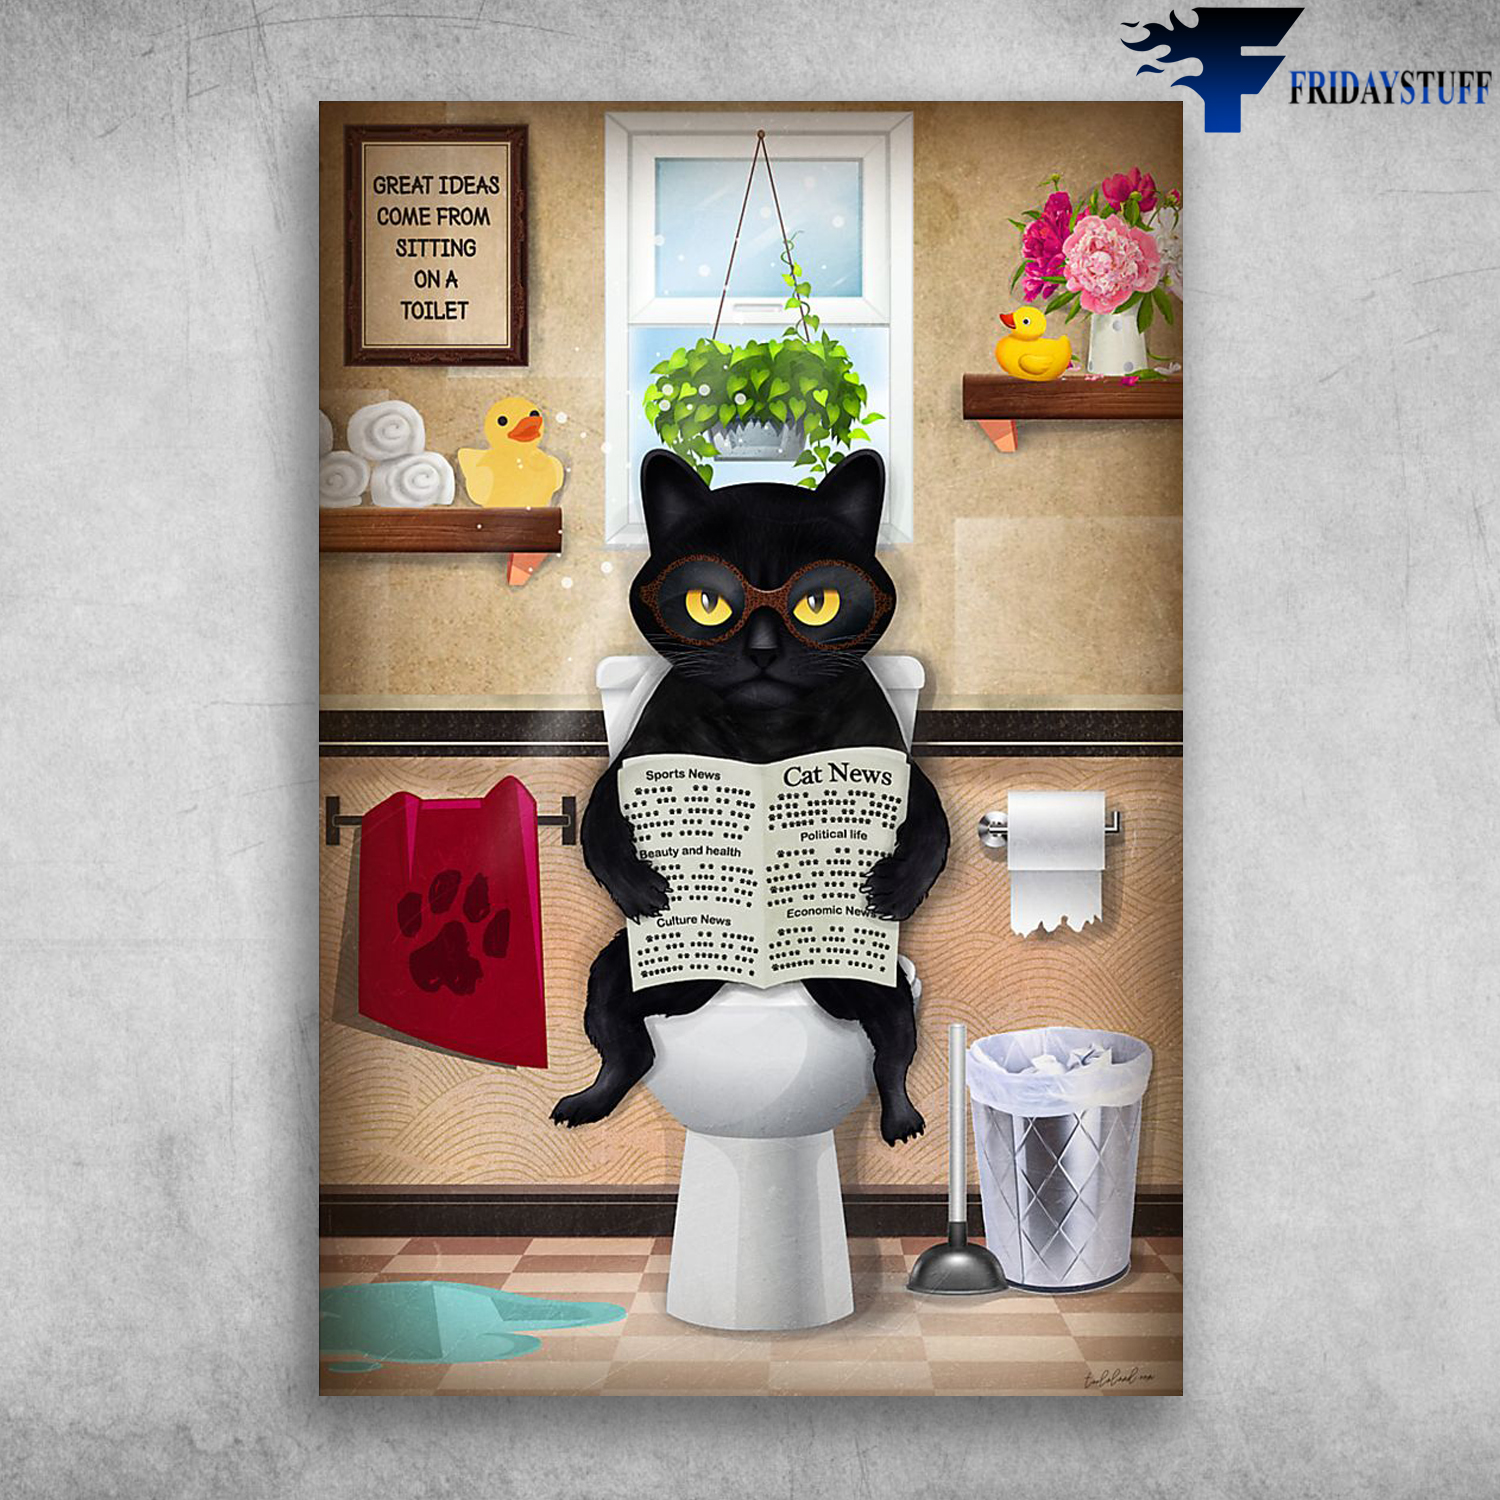 Funny Black Cat Read Newspaper In Toilet Great Ideas Come From Sitting On A Toilet